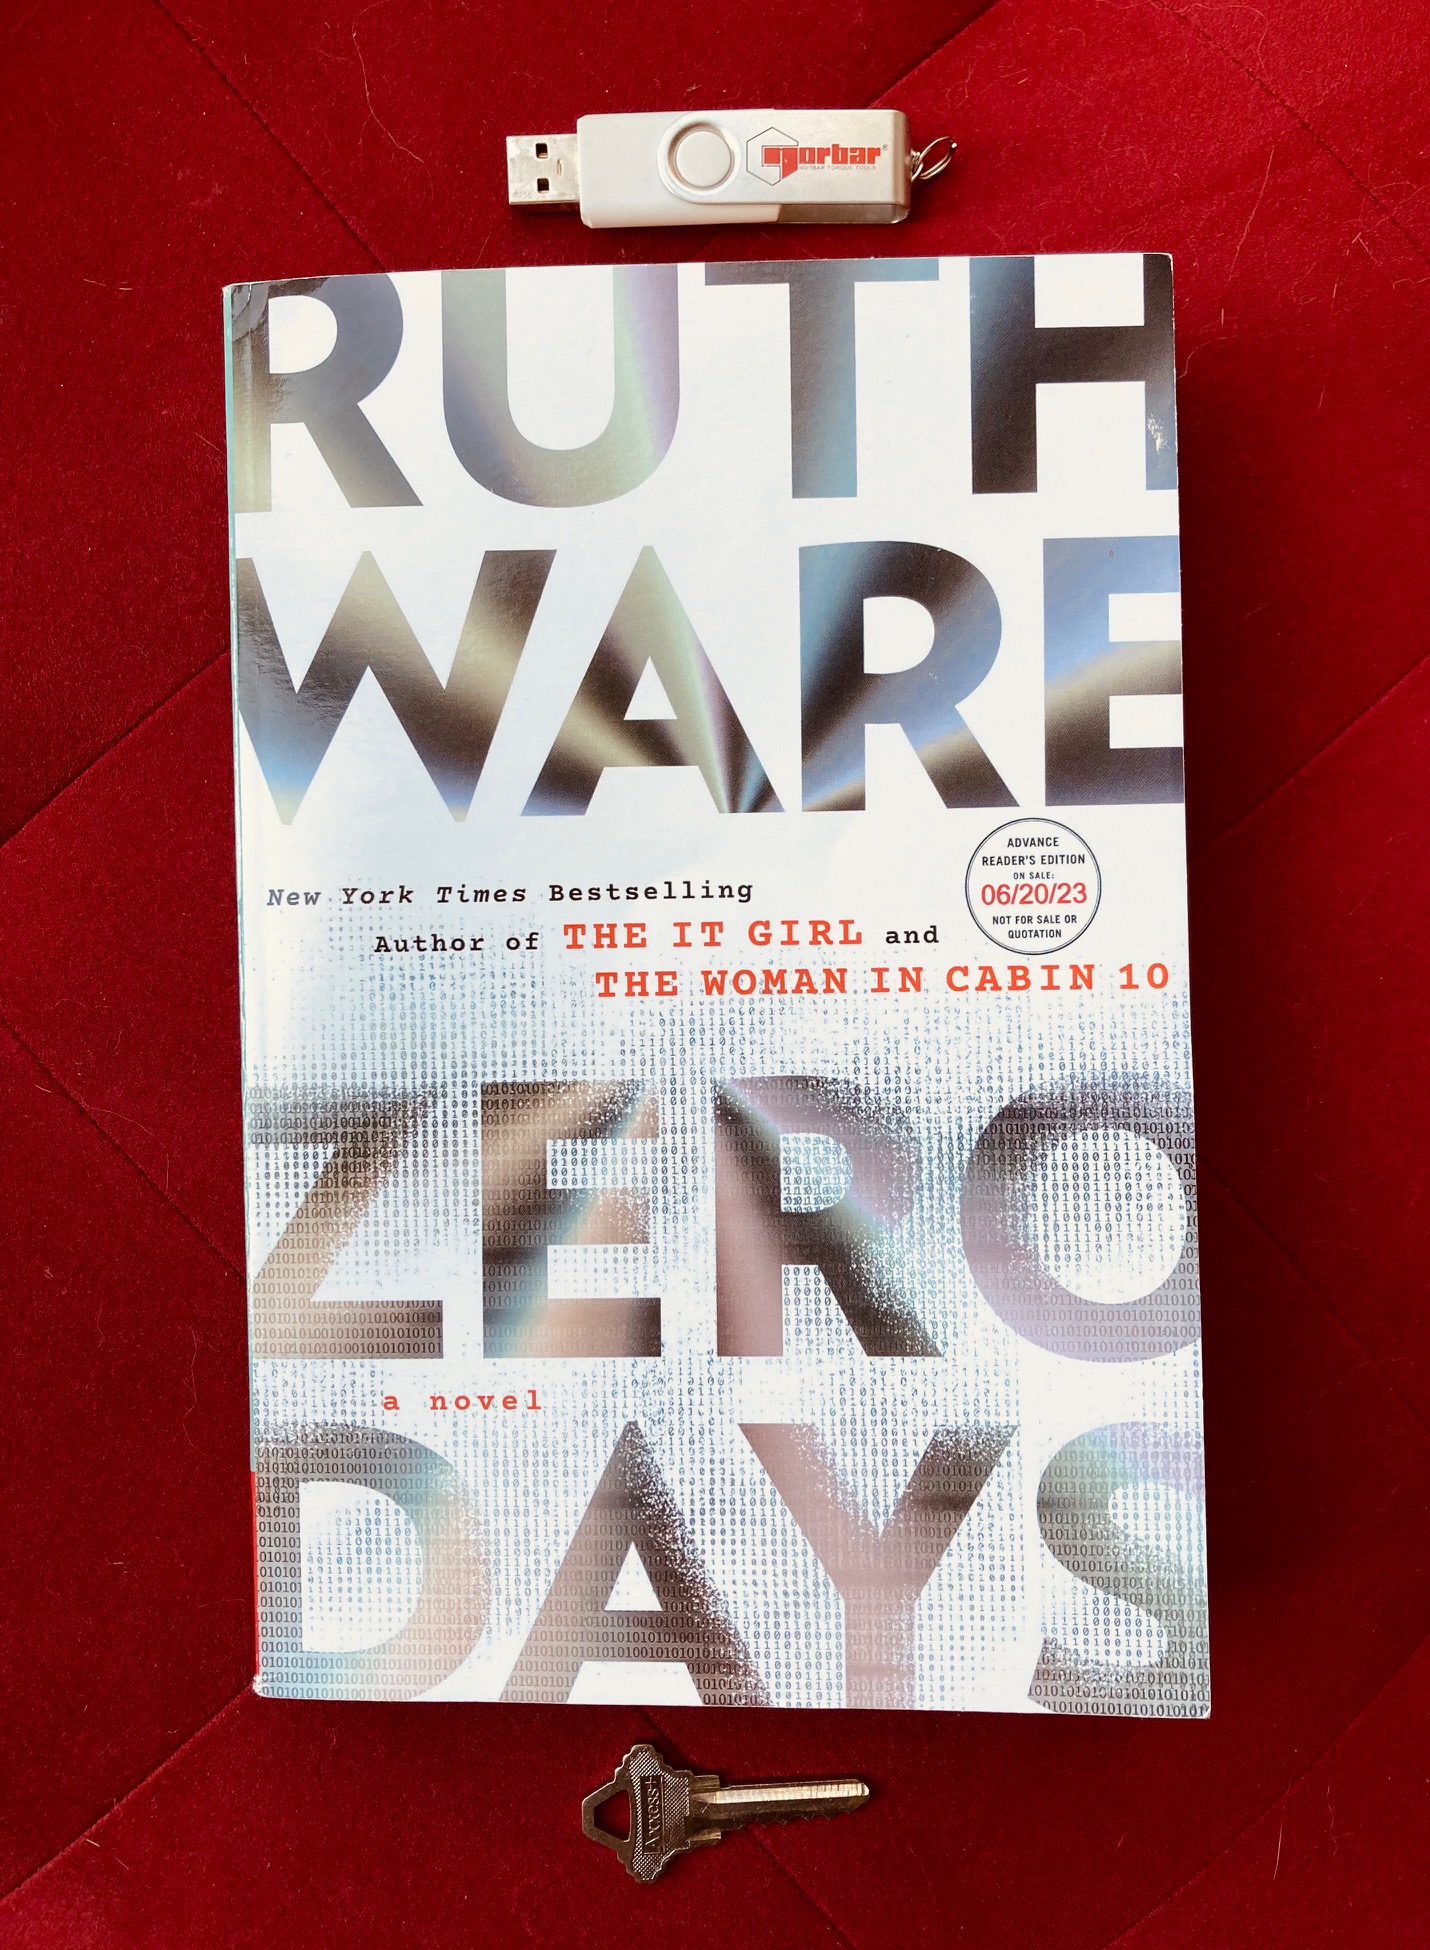 Zero Days by Ruth Ware book, pictured with a USB key and a door key on a red background